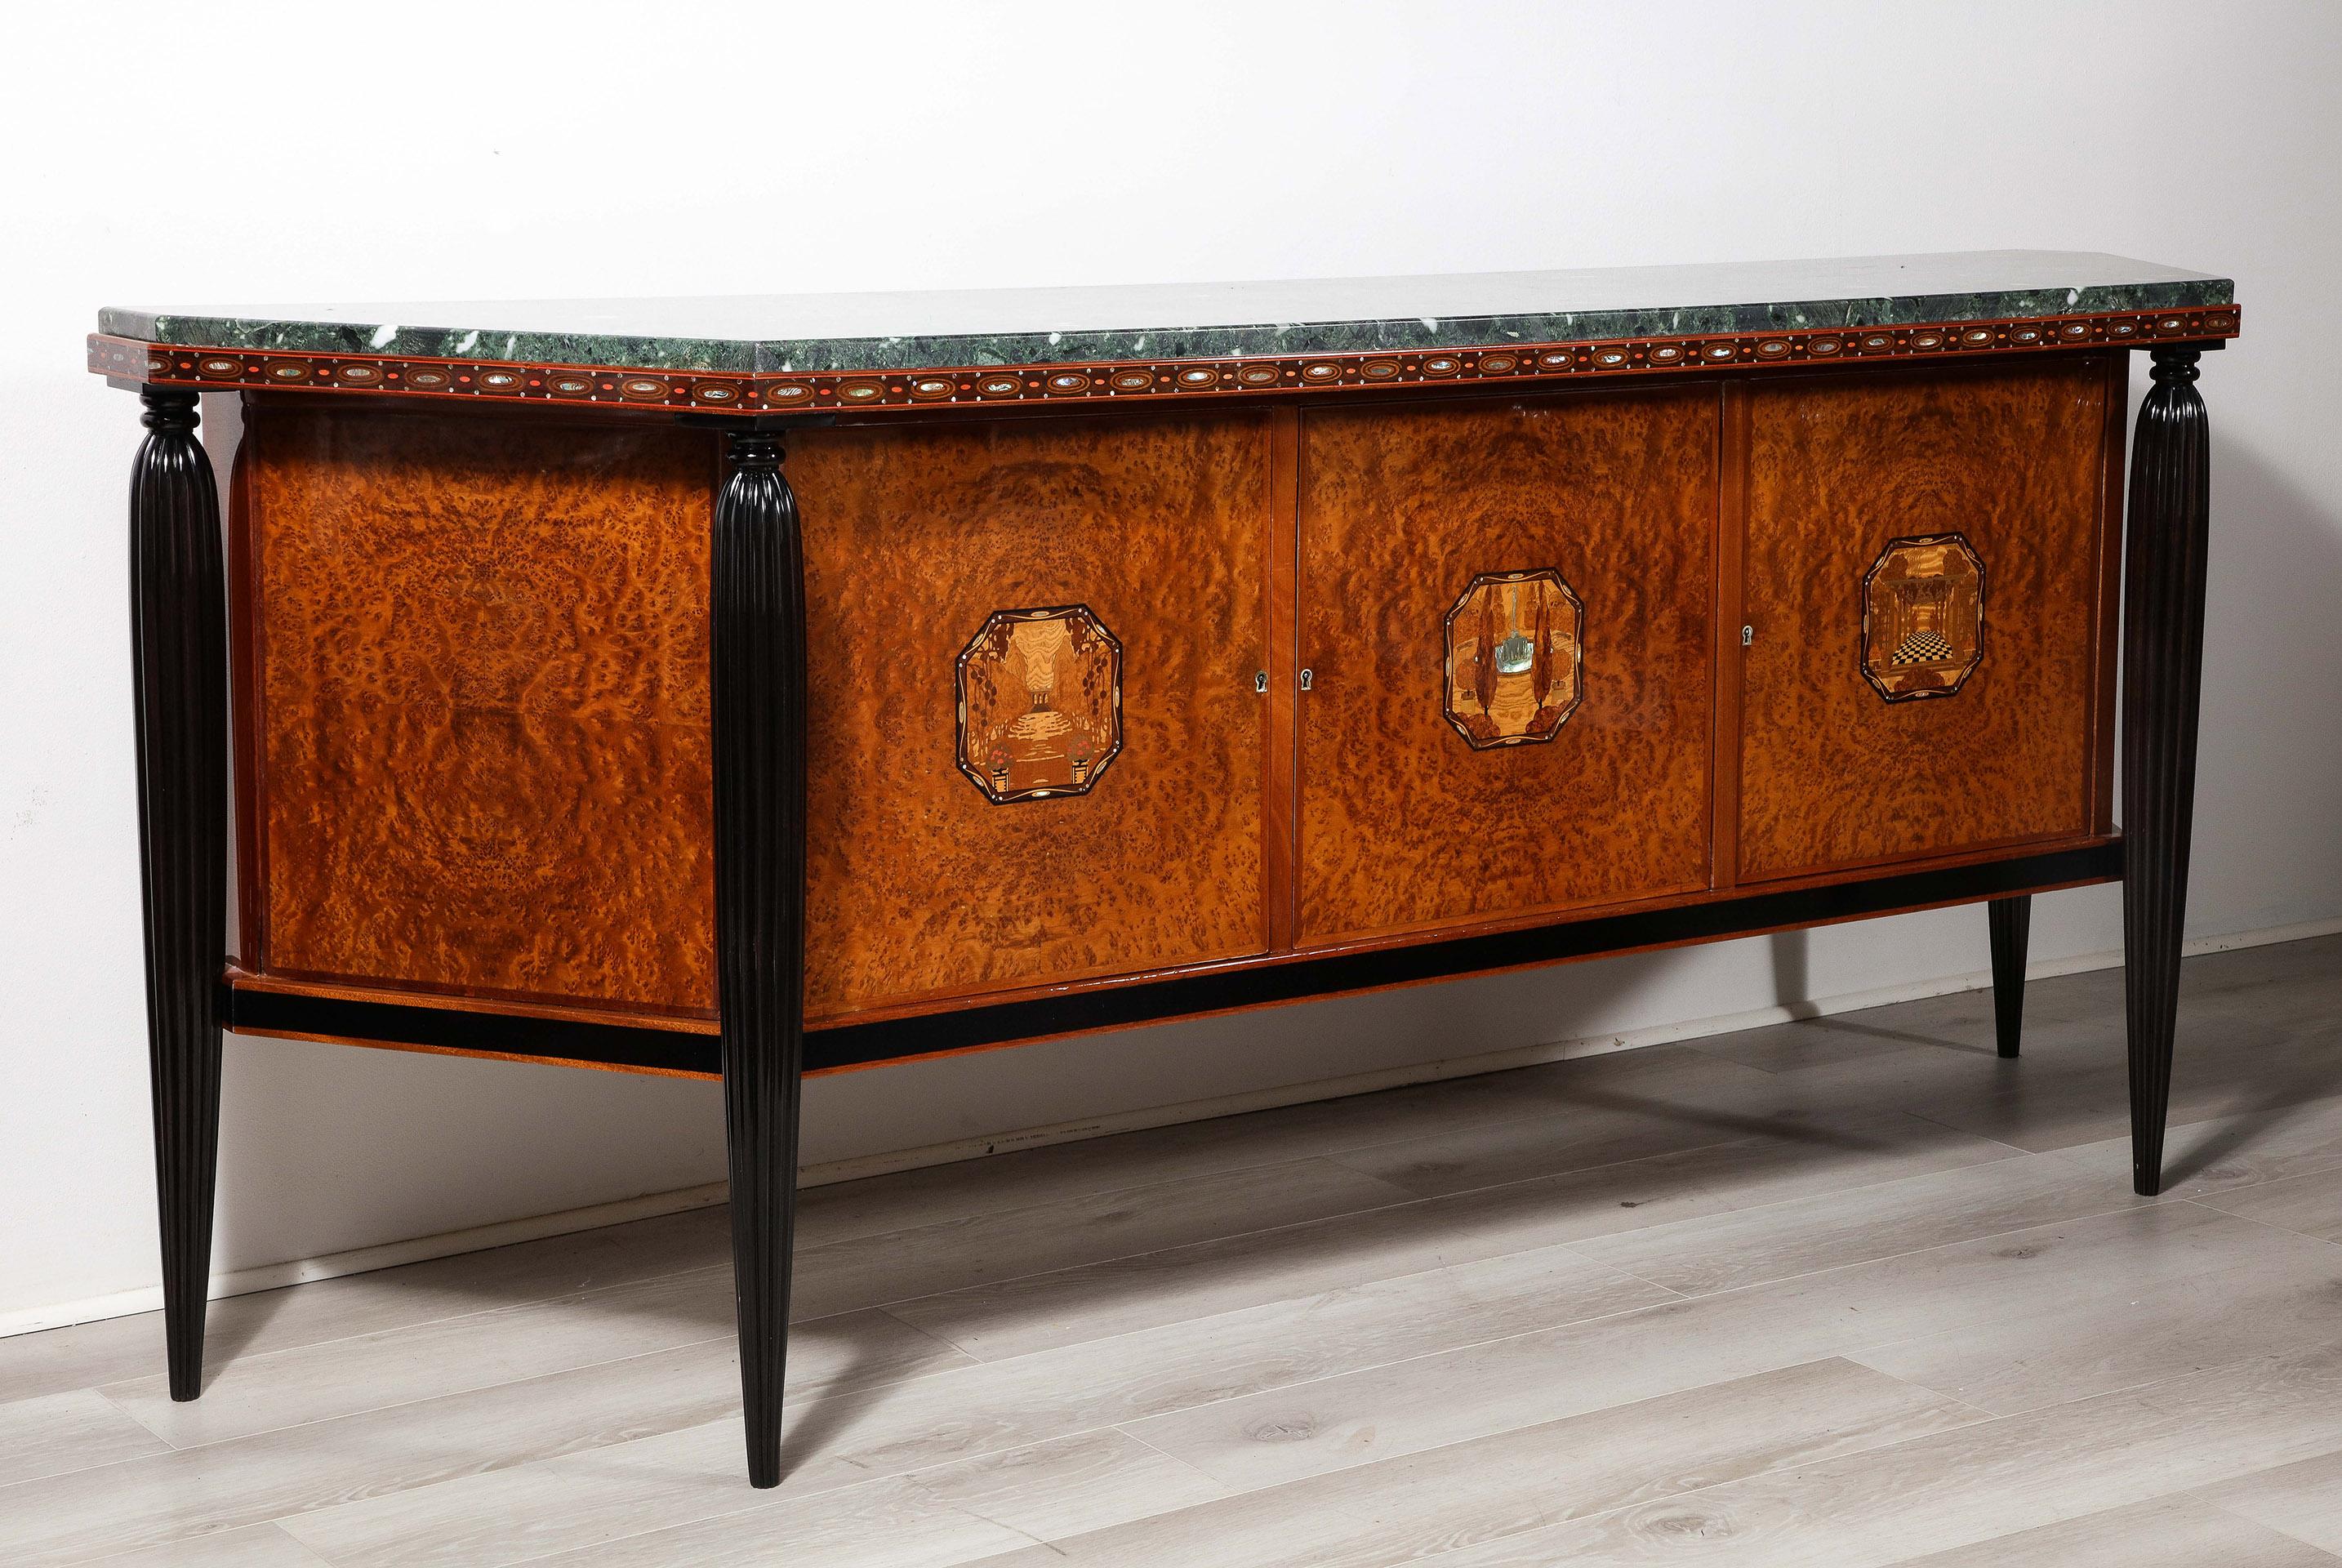 A superb example of early Art Deco Design by Maurice Dufrene. The burr walnut canted sideboard supporting a marble top, which is 